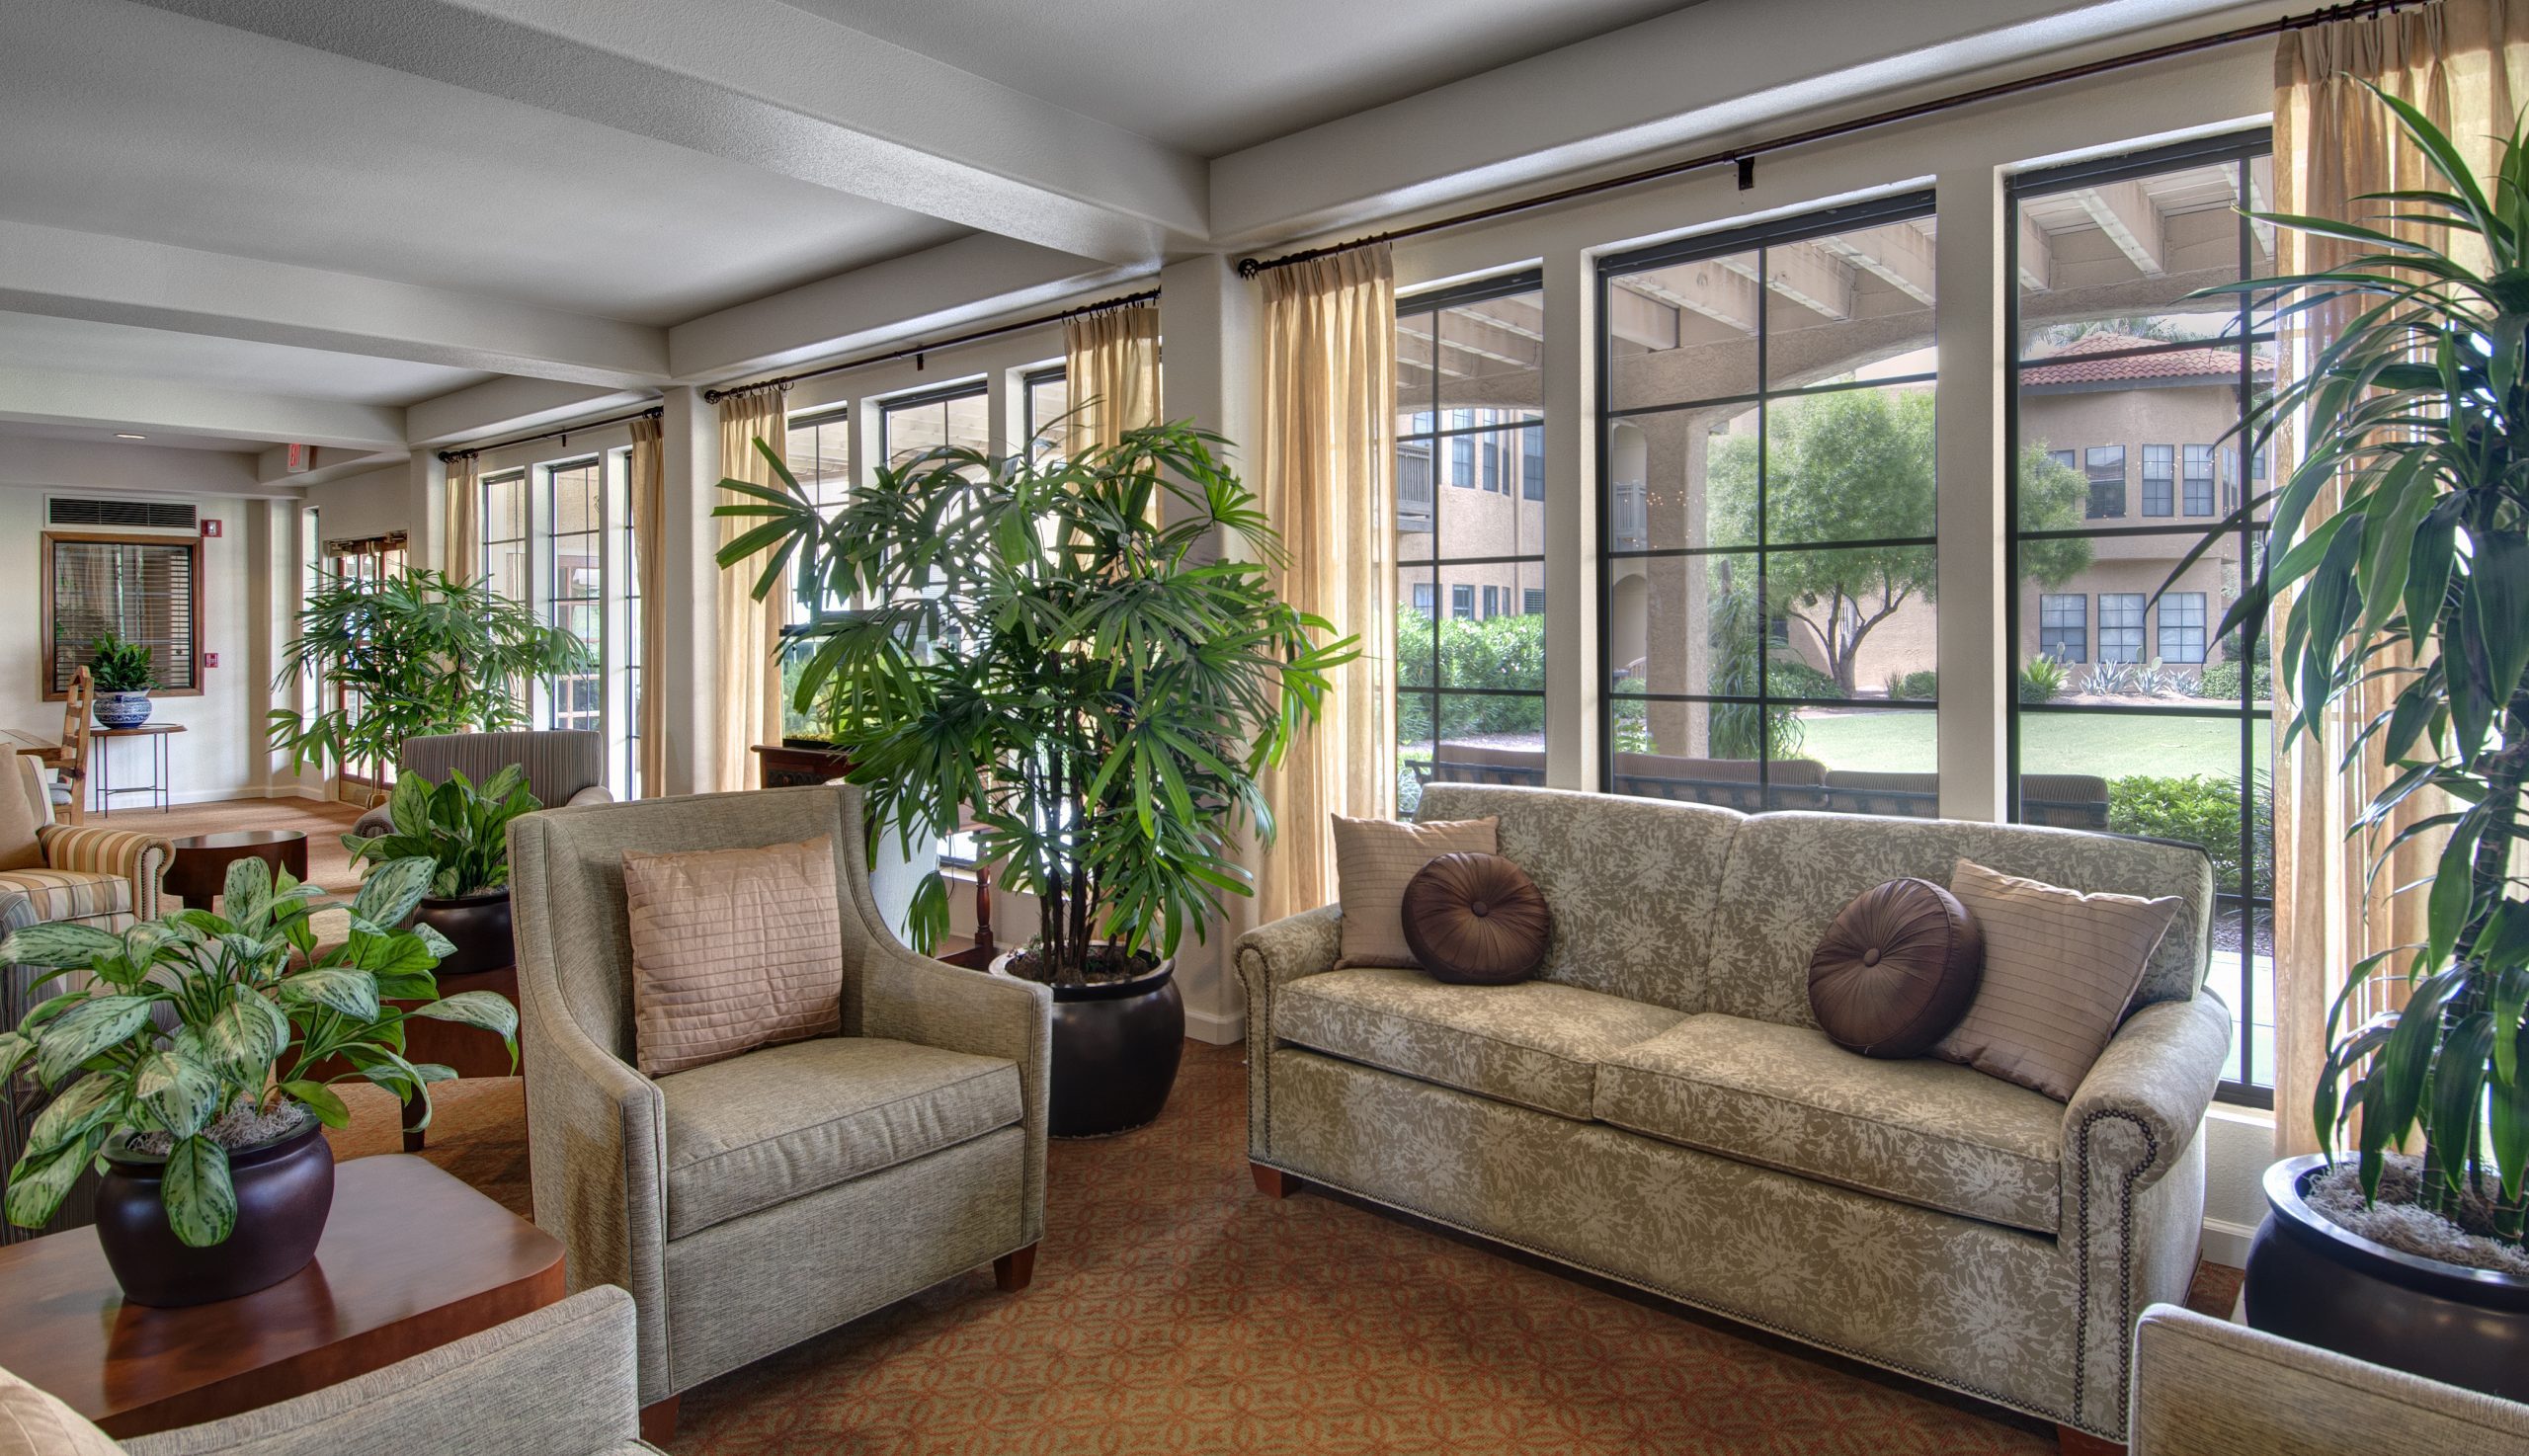 Spacious and cozy living room at the community, perfect for relaxation and socializing